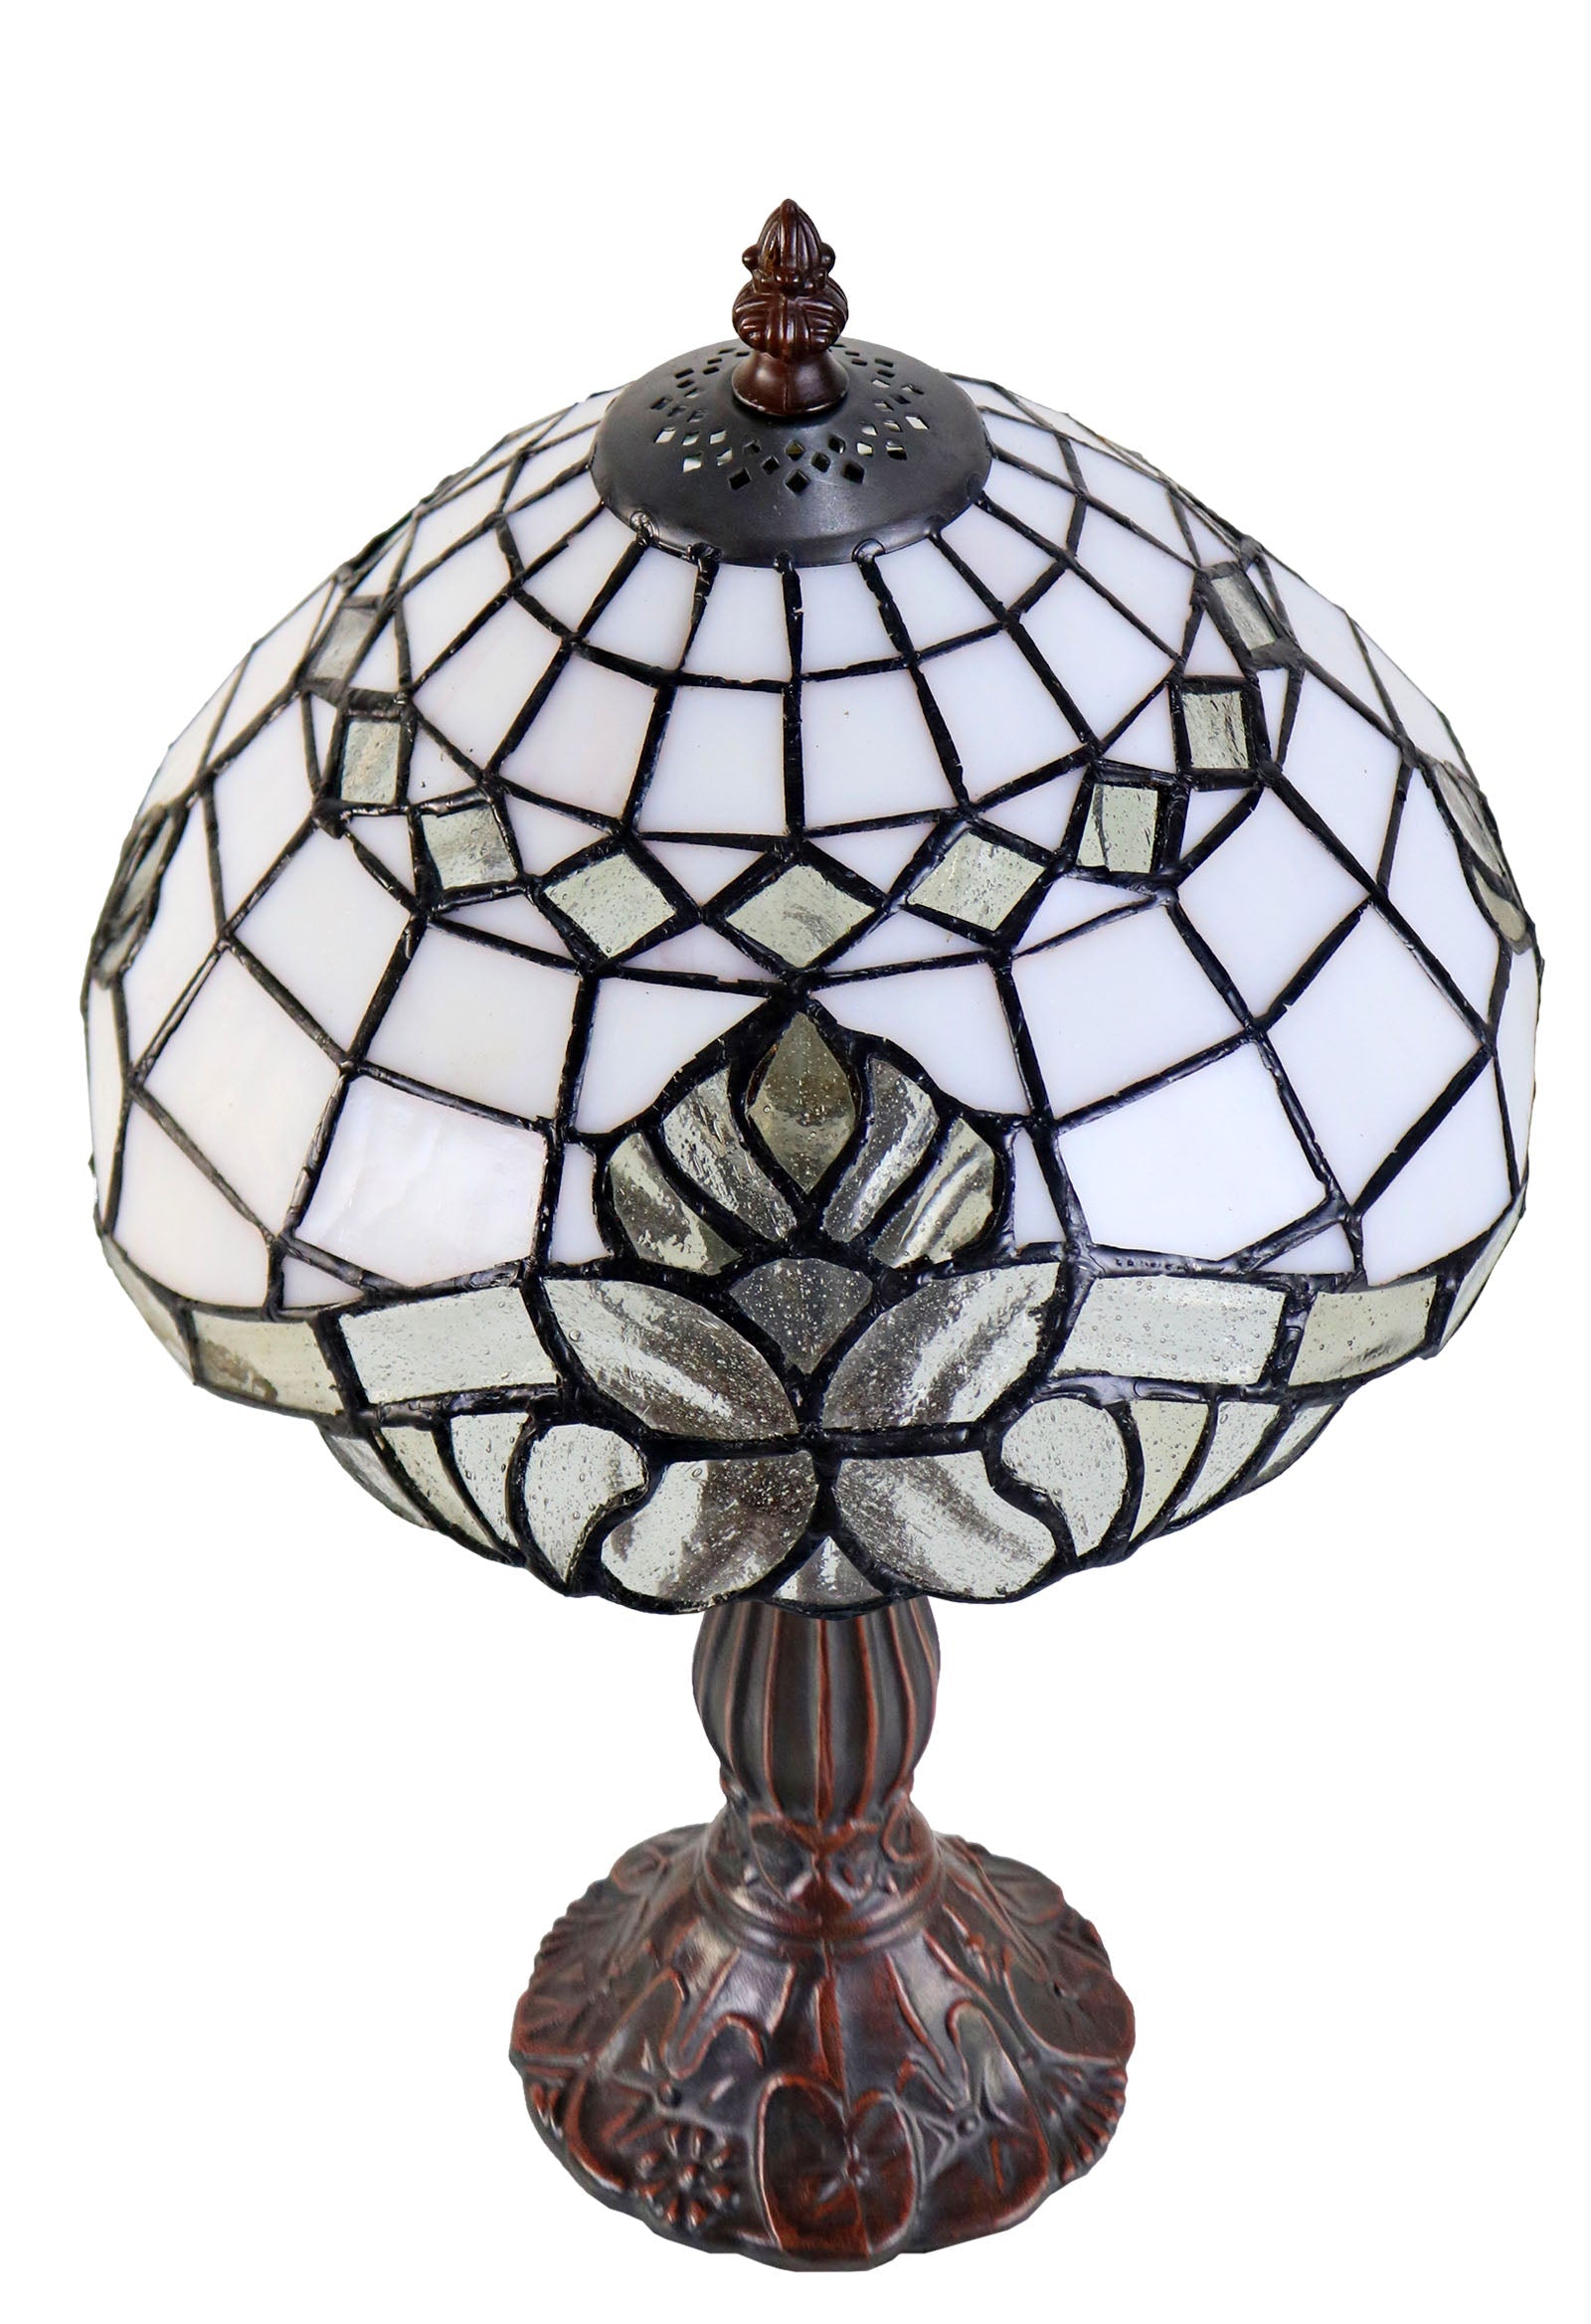 Classical 10" Vienna Baroque Tiffany Table Lamp bedside Lamp